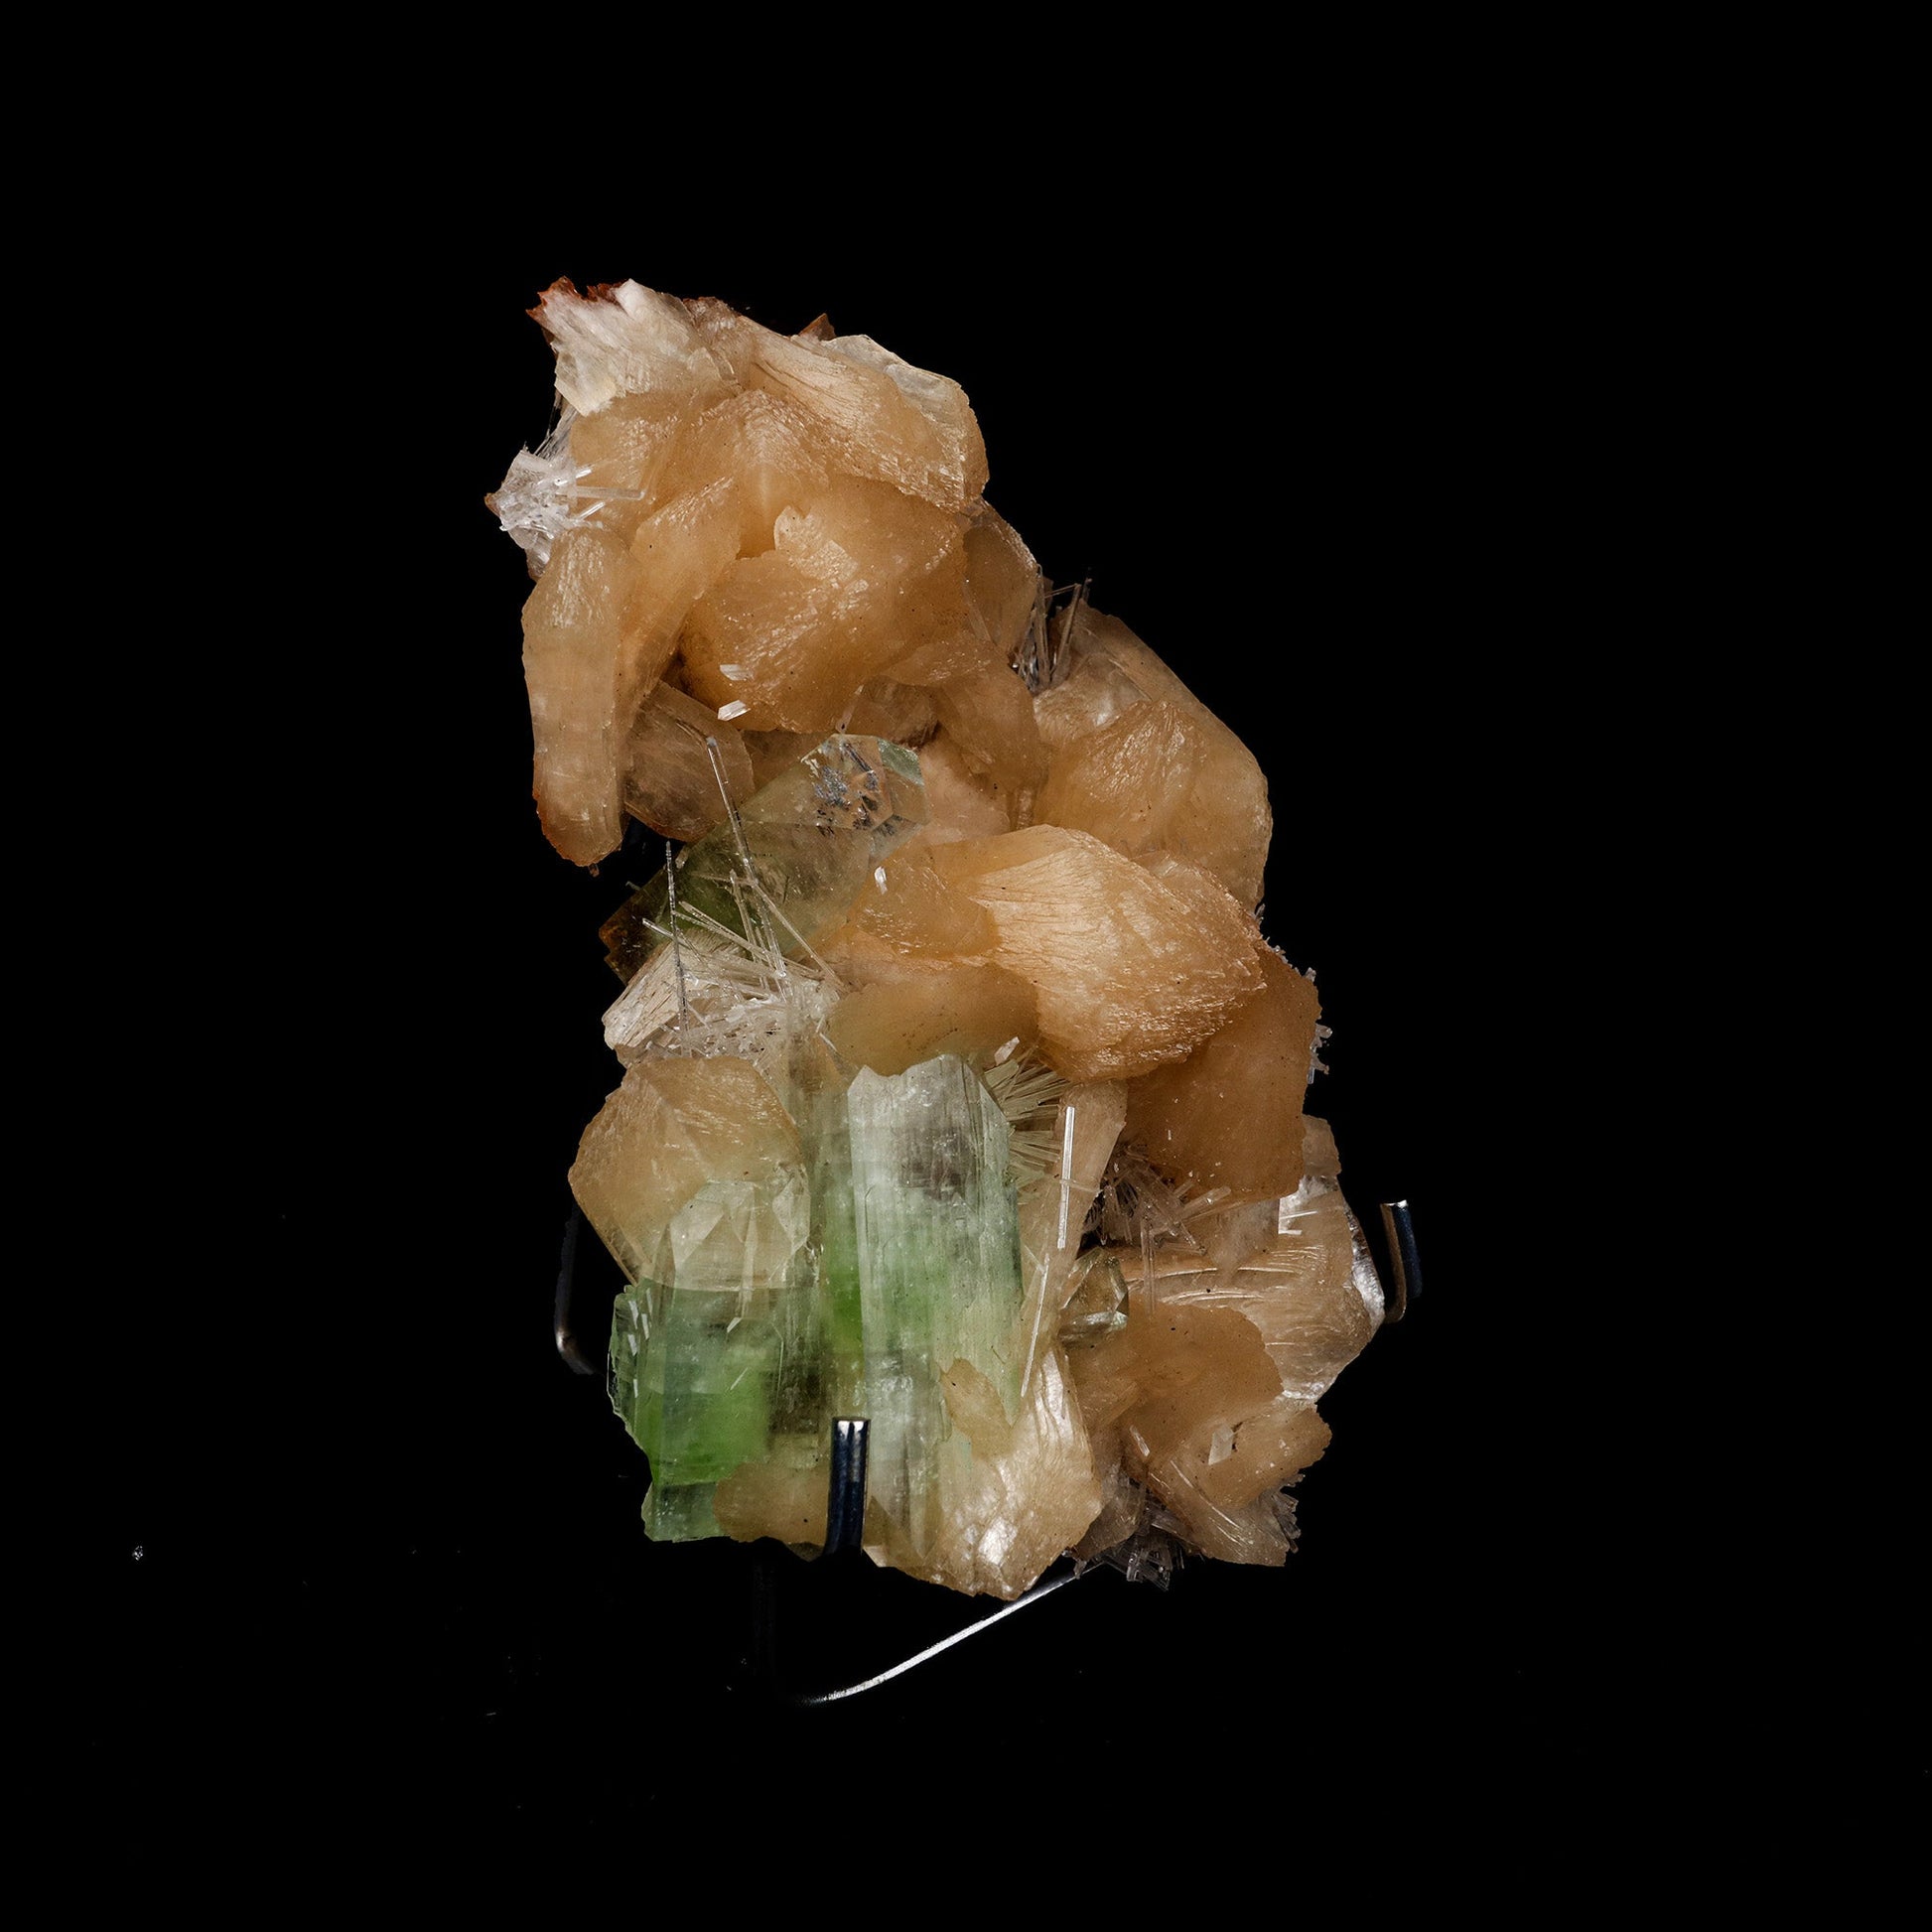 Green Apophyllite with Scolecite Sprays on Stilbite Natural Mineral Sp…  https://www.superbminerals.us/products/green-apophyllite-with-scolecite-sprays-on-stilbite-natural-mineral-specimen-b-5267  Features: This is a beautiful cluster of pseudo-cubic Apophyllite crystals and lustrous peach stilbite. Large Apophyllite crystals show interesting zoning with bands of colors from apple green at the base of the crystals to clear at the top. Primary Mineral(s): Apophyllite Secondary Mineral(s): Stilbite, Scolecite